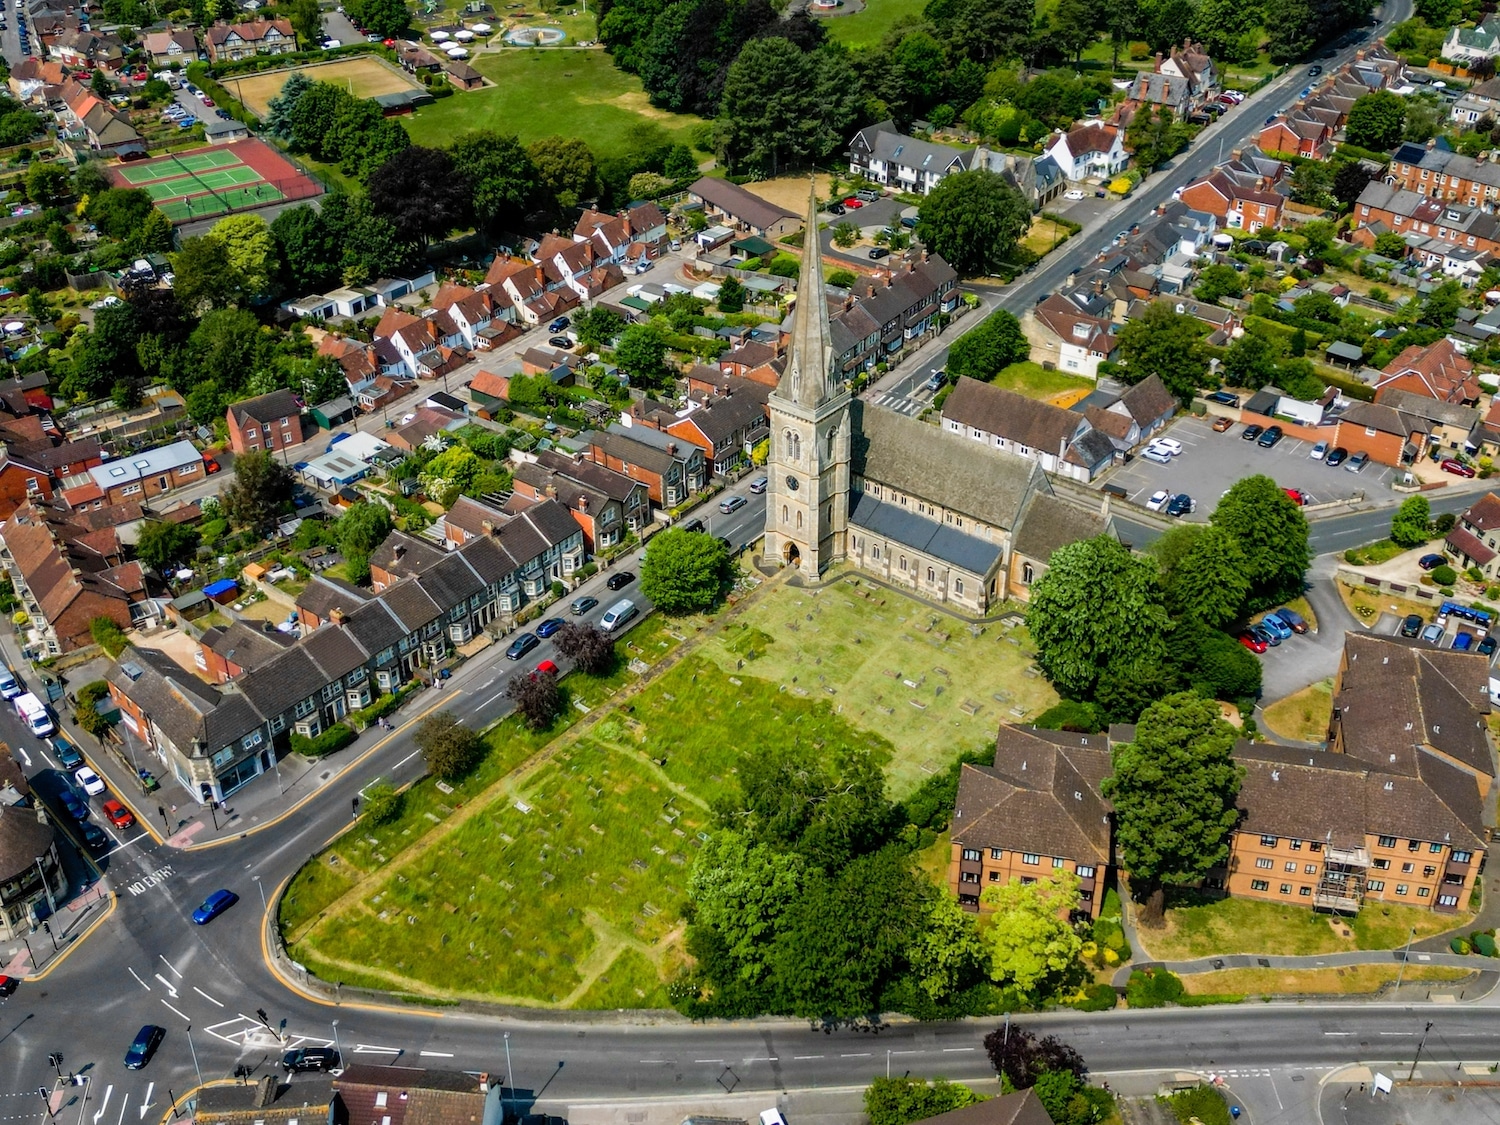 5 Things to do in Chippenham. Image shows an aerial view of St Pauls Church, Chippenham, Wiltshire, UK